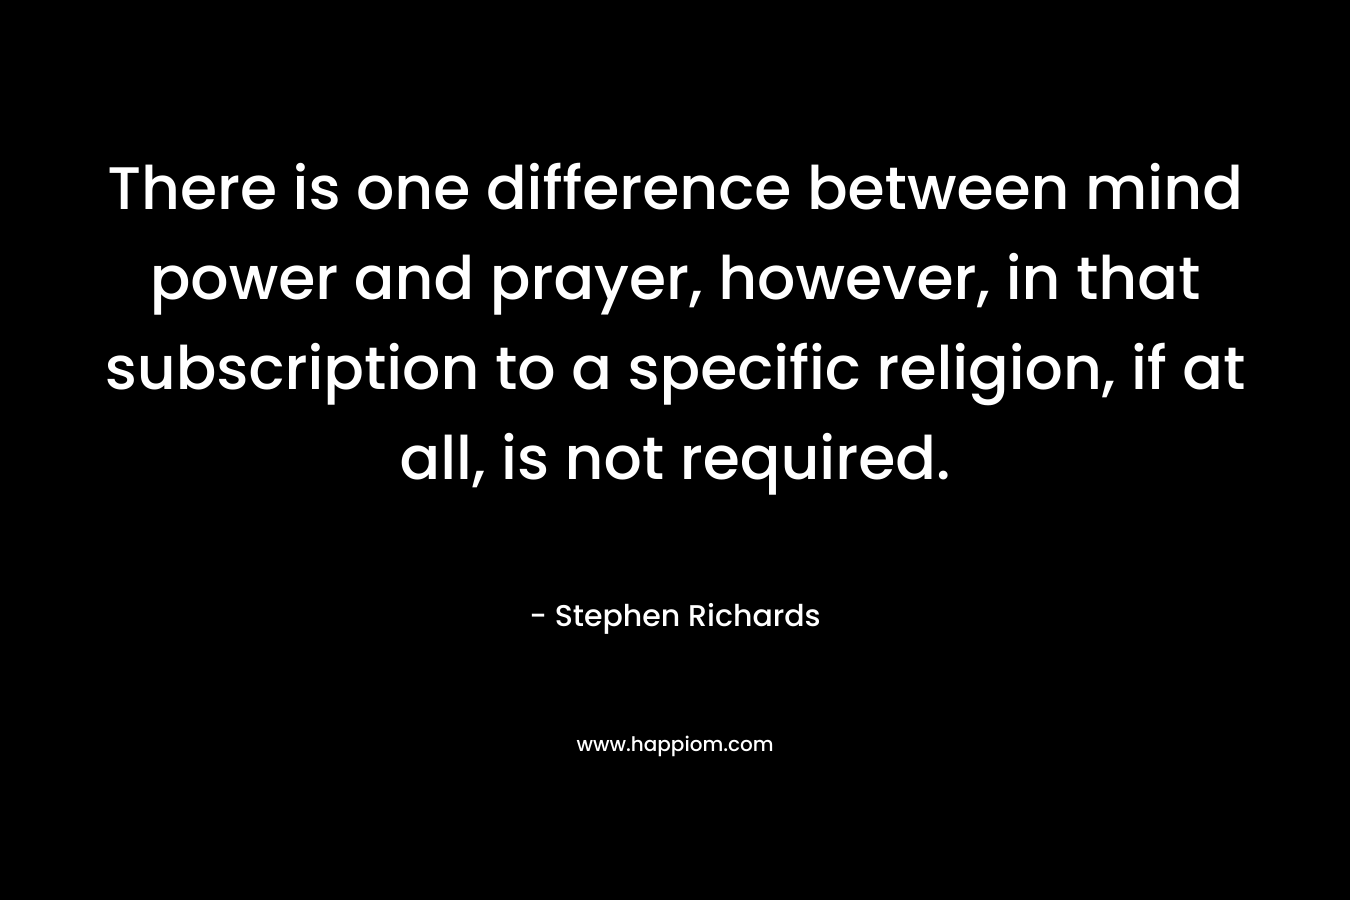 There is one difference between mind power and prayer, however, in that subscription to a specific religion, if at all, is not required. – Stephen Richards